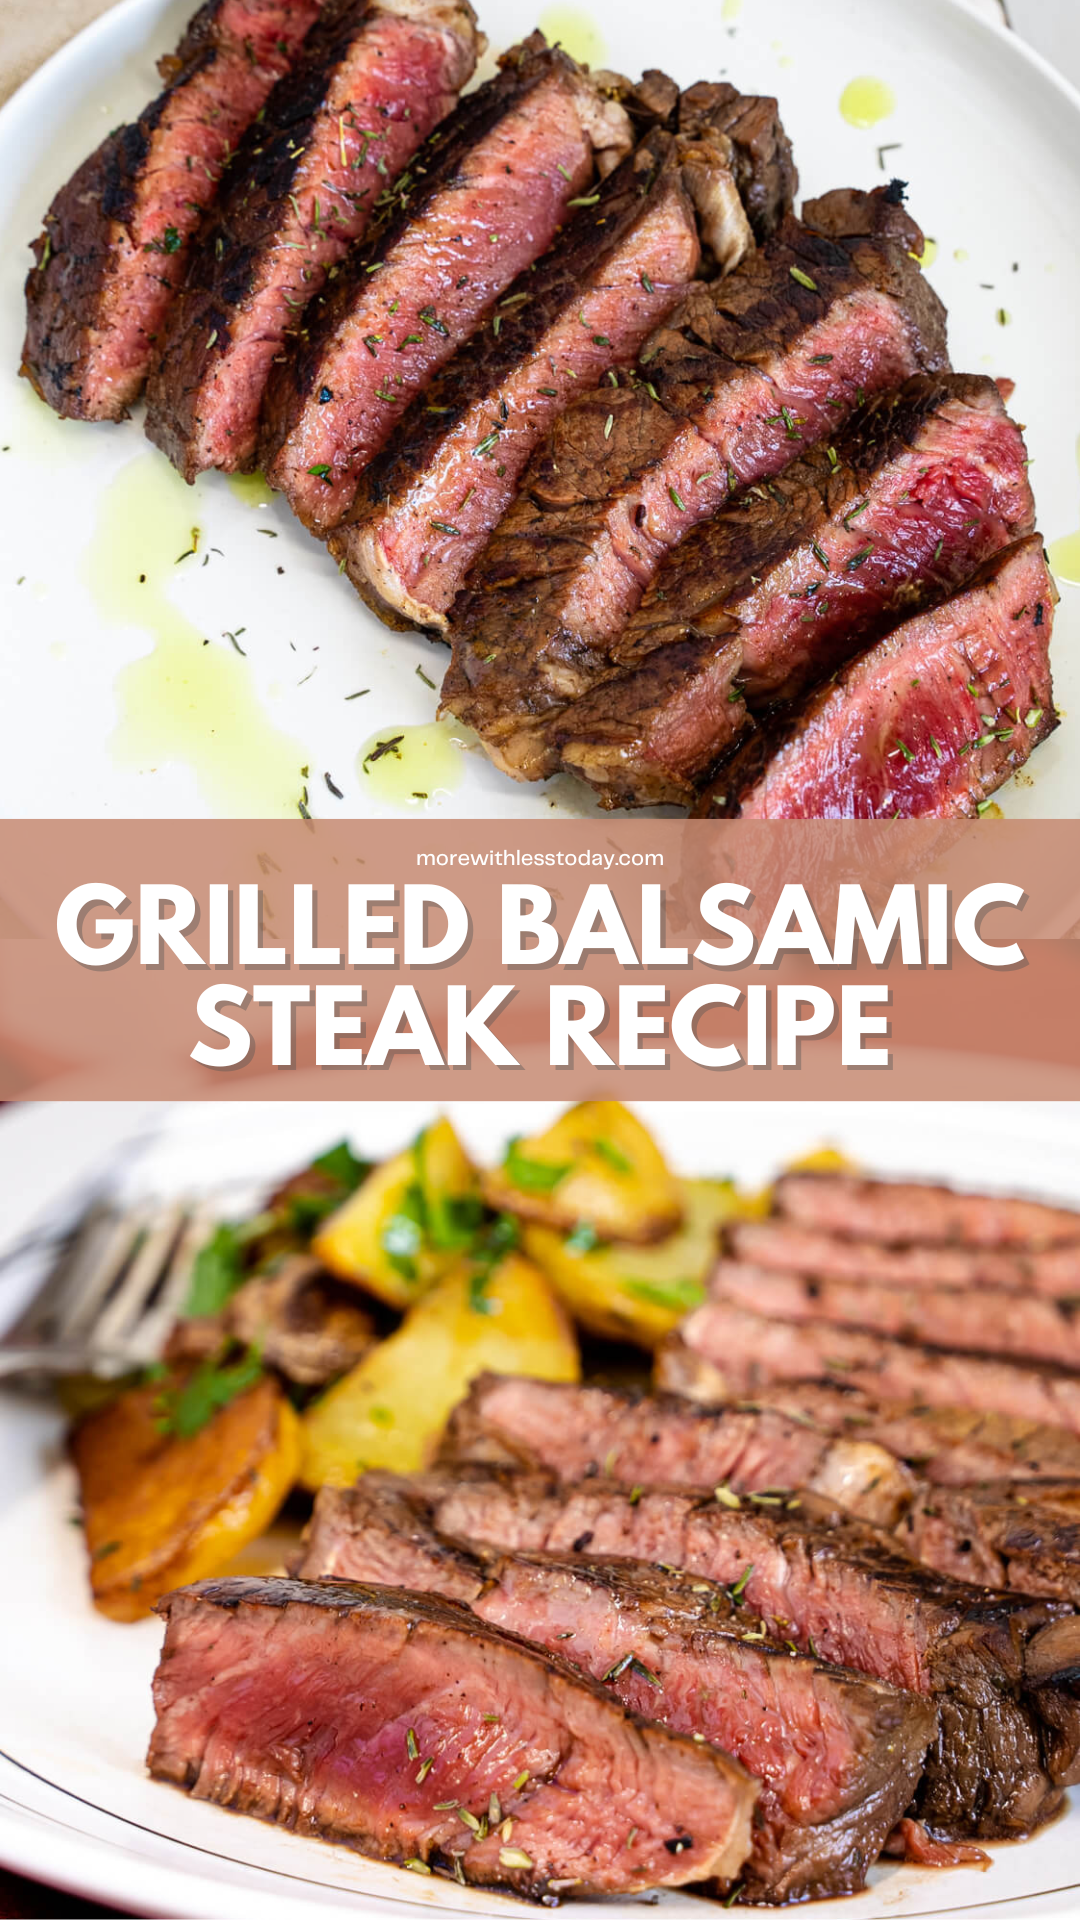 Grilled Balsamic Steak Recipe - an easy and hearty recipe to get good food on the table fast.